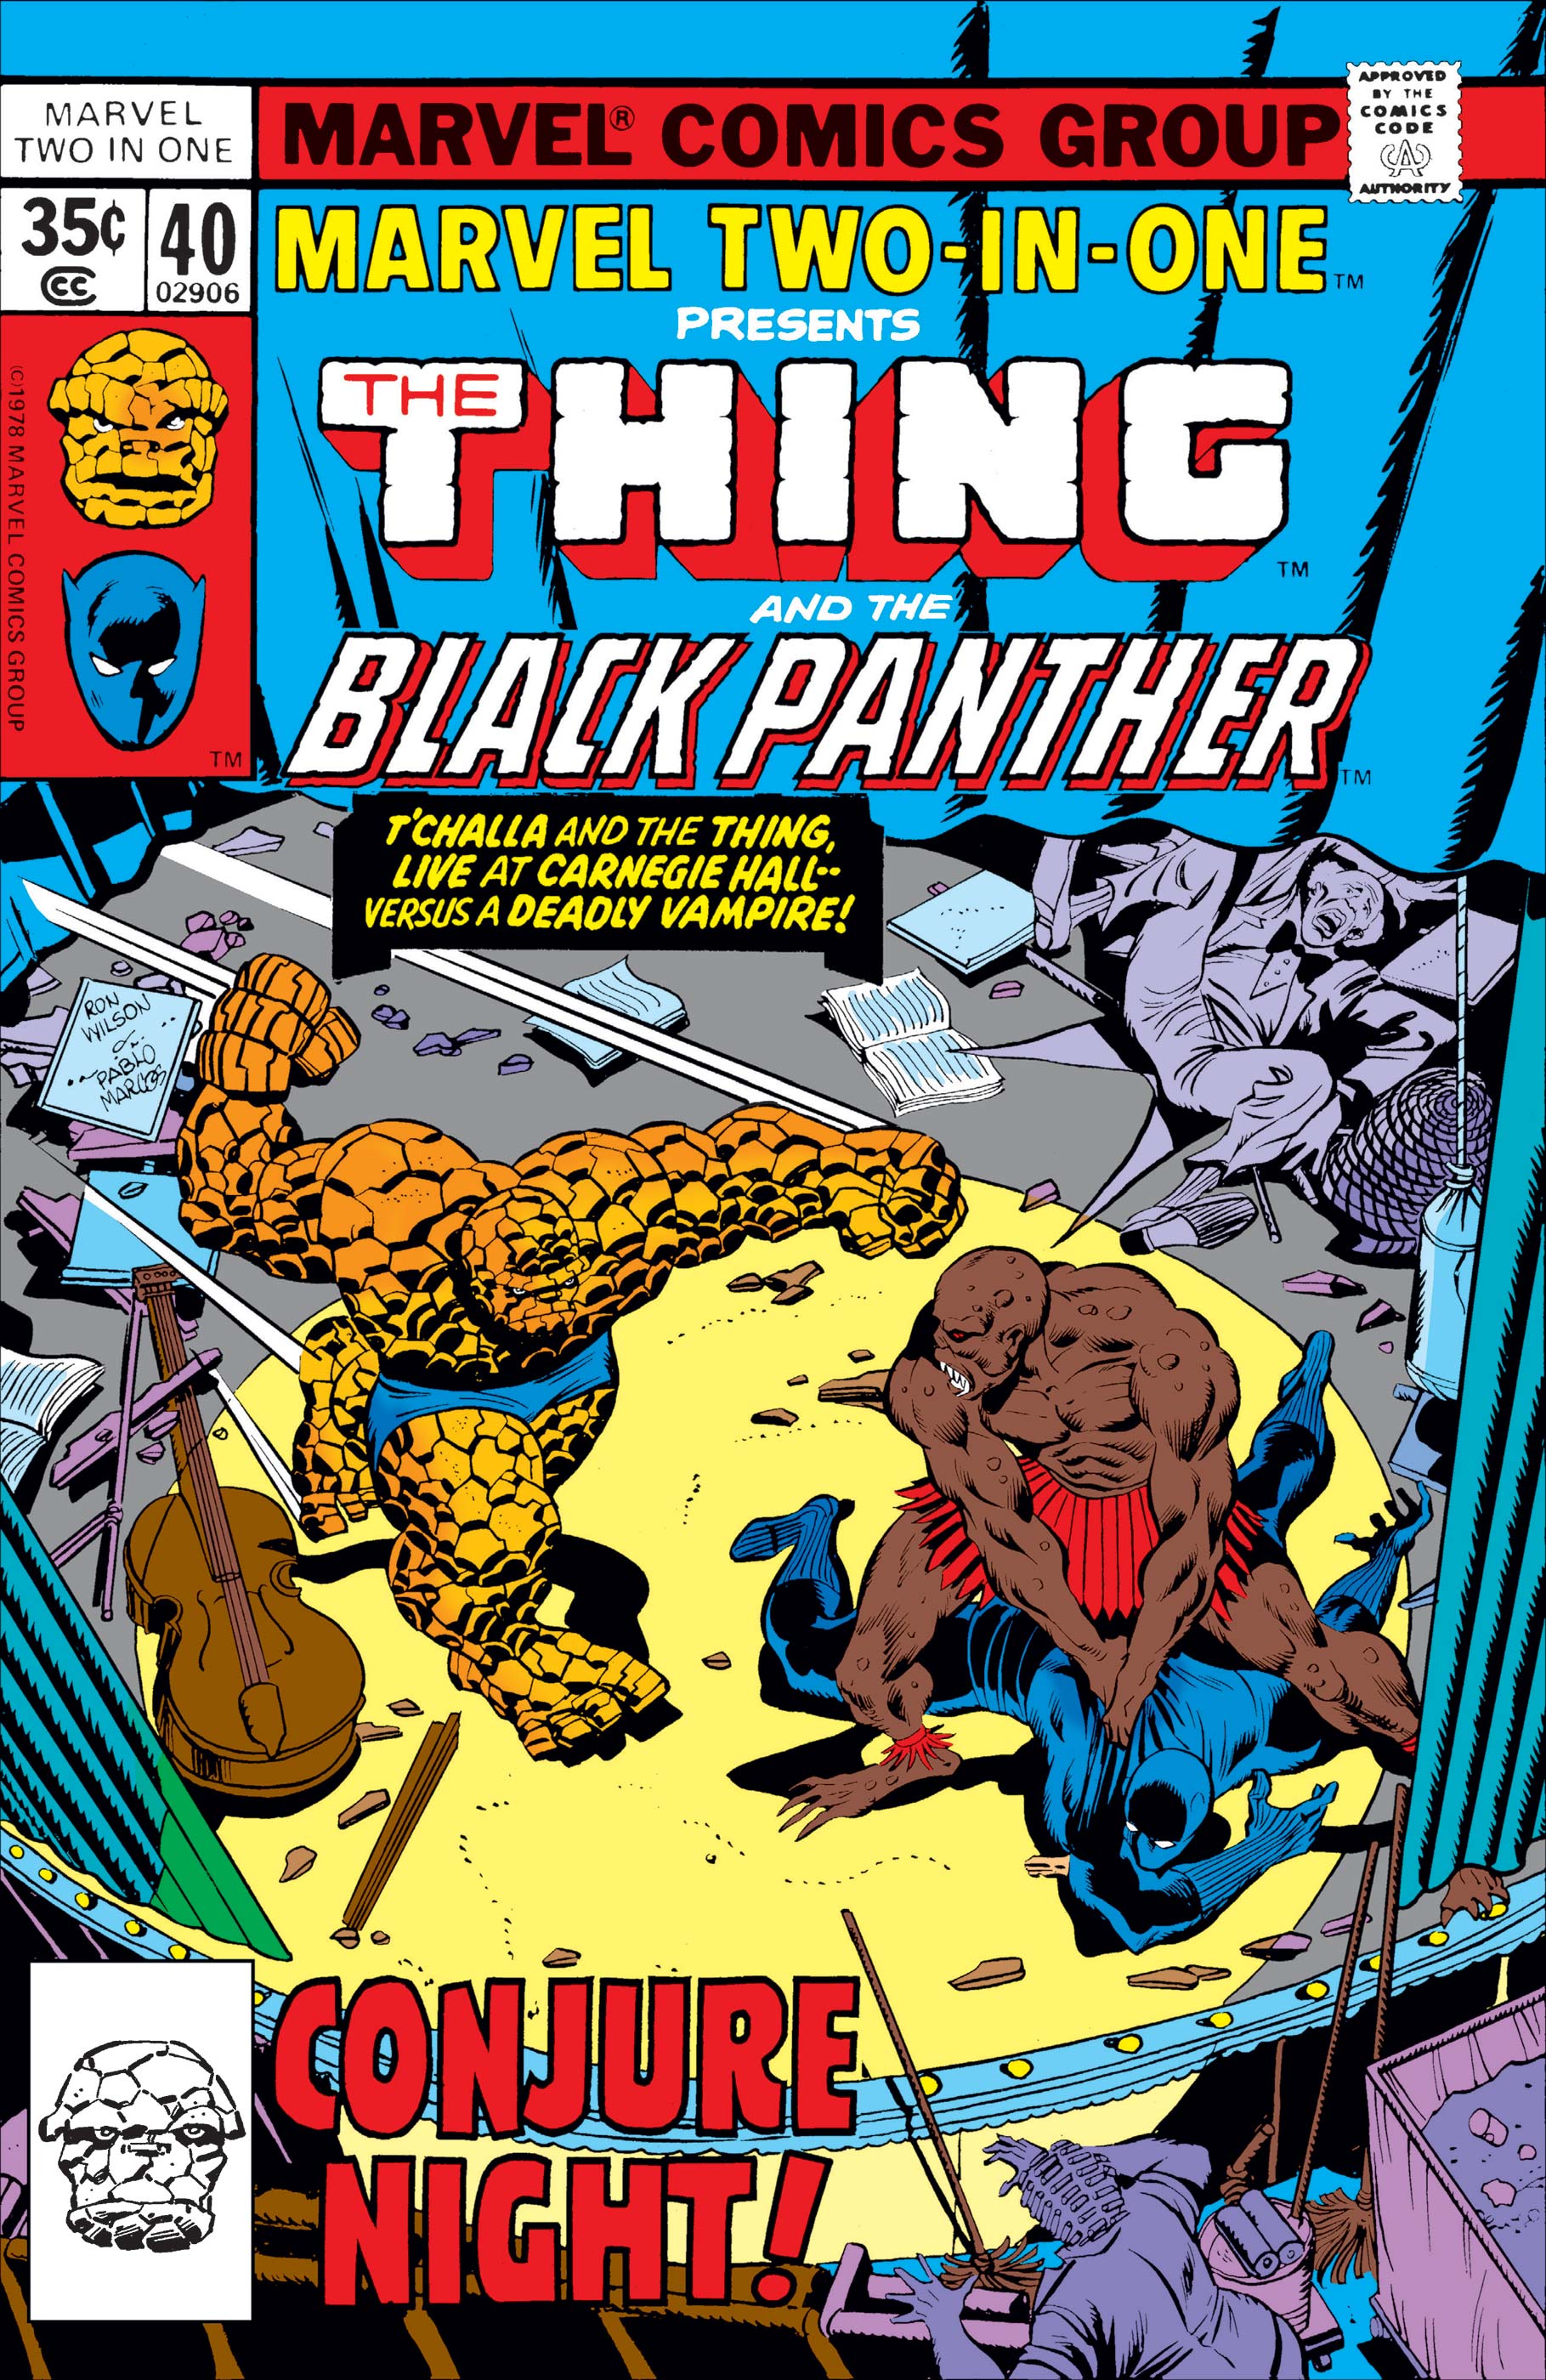 Marvel Two-in-One (1974) #40